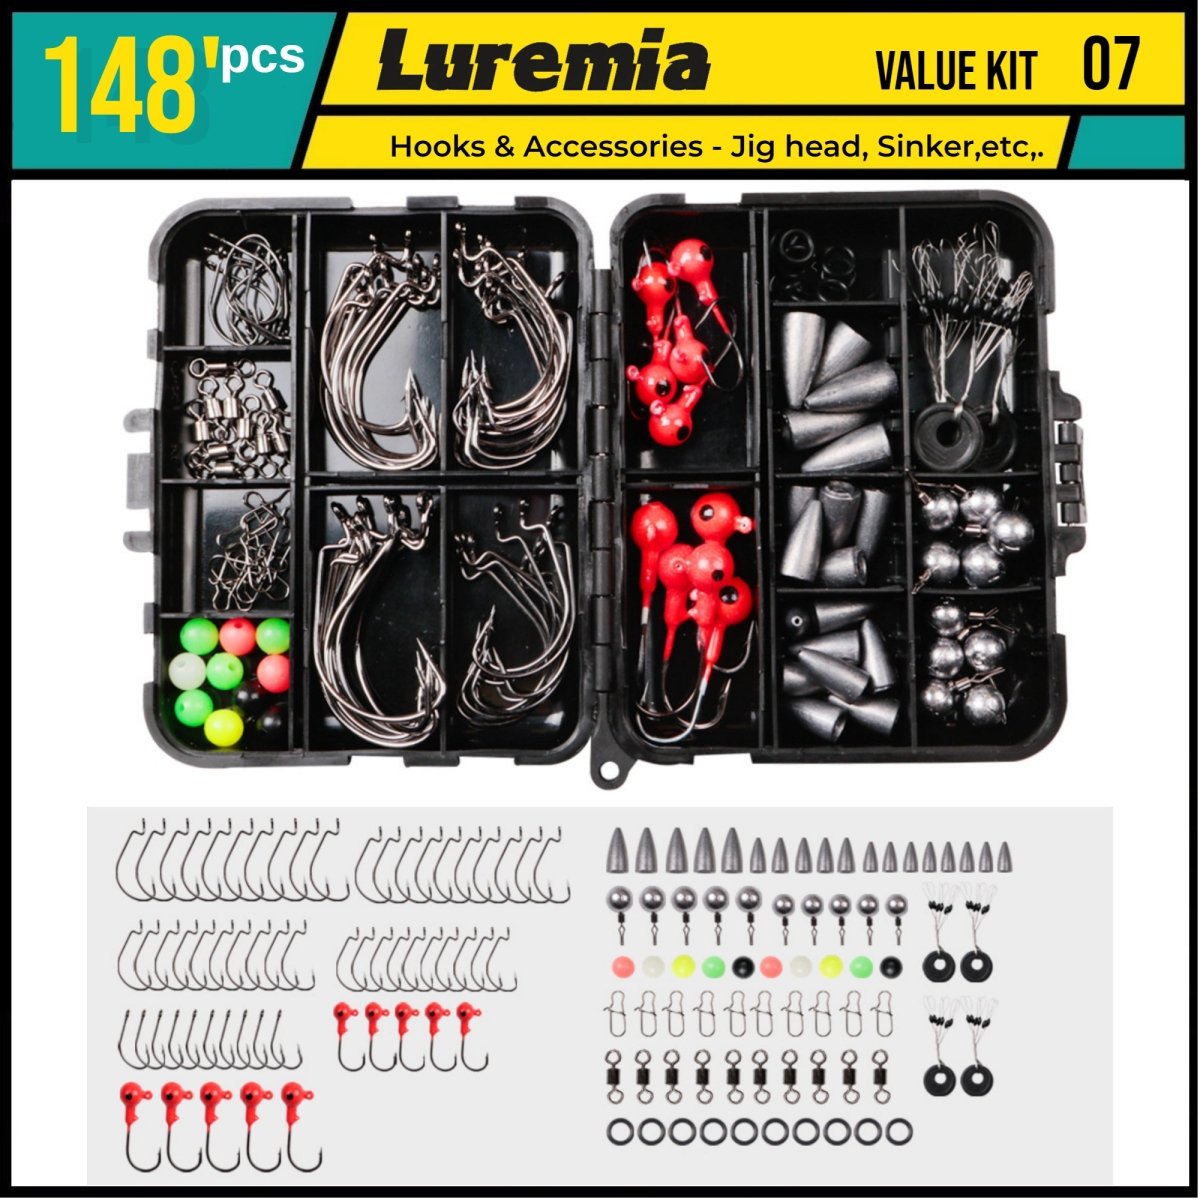 Luremia Fishing Tackle Value Pack 07 (148pcs) - Hooks & Accessories